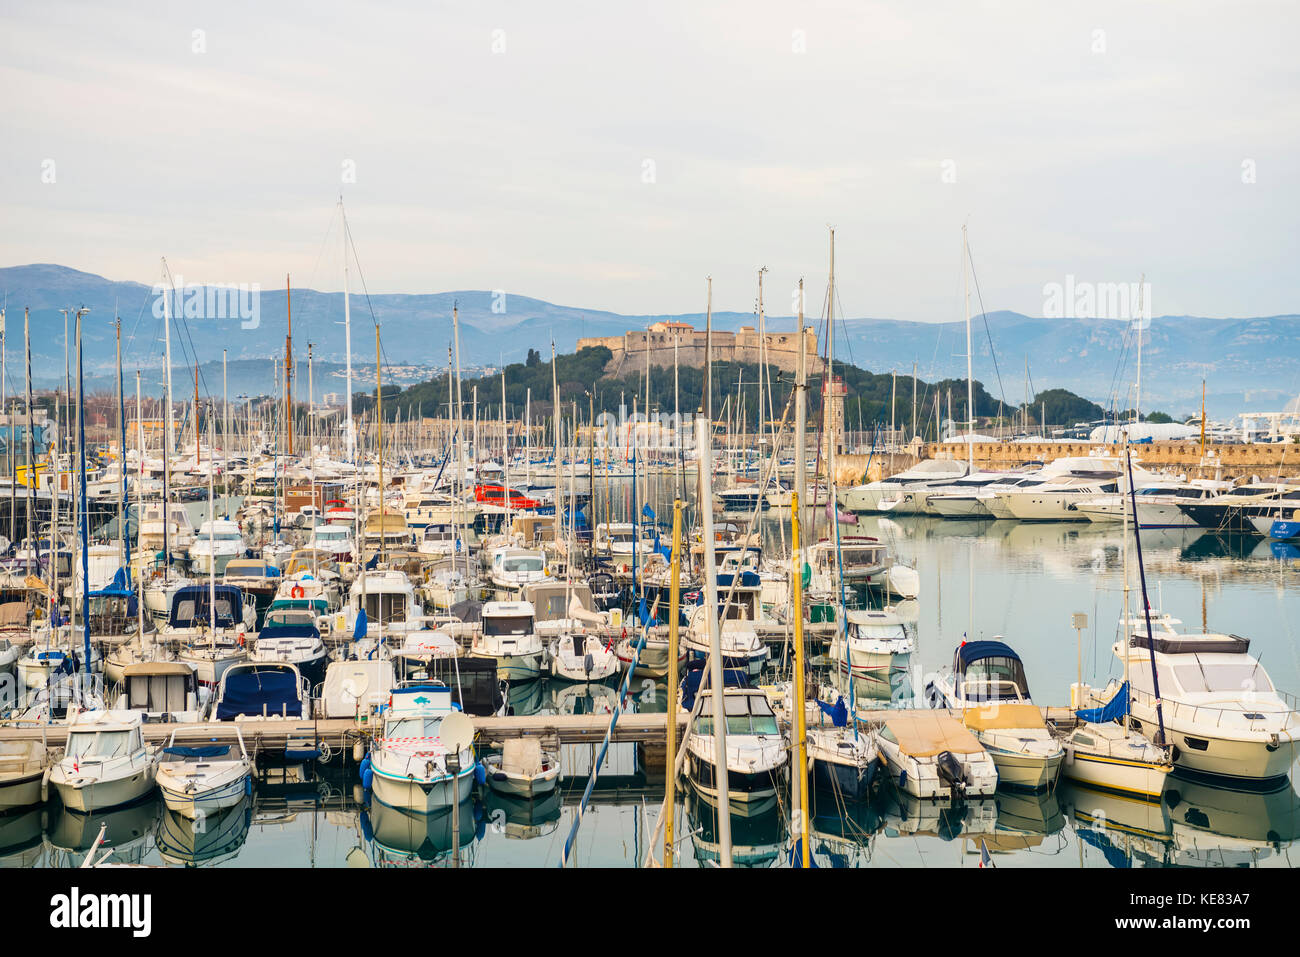 Abundance Of Boats In A Harbour; Antibes, Cote D'azur, France Stock Photo